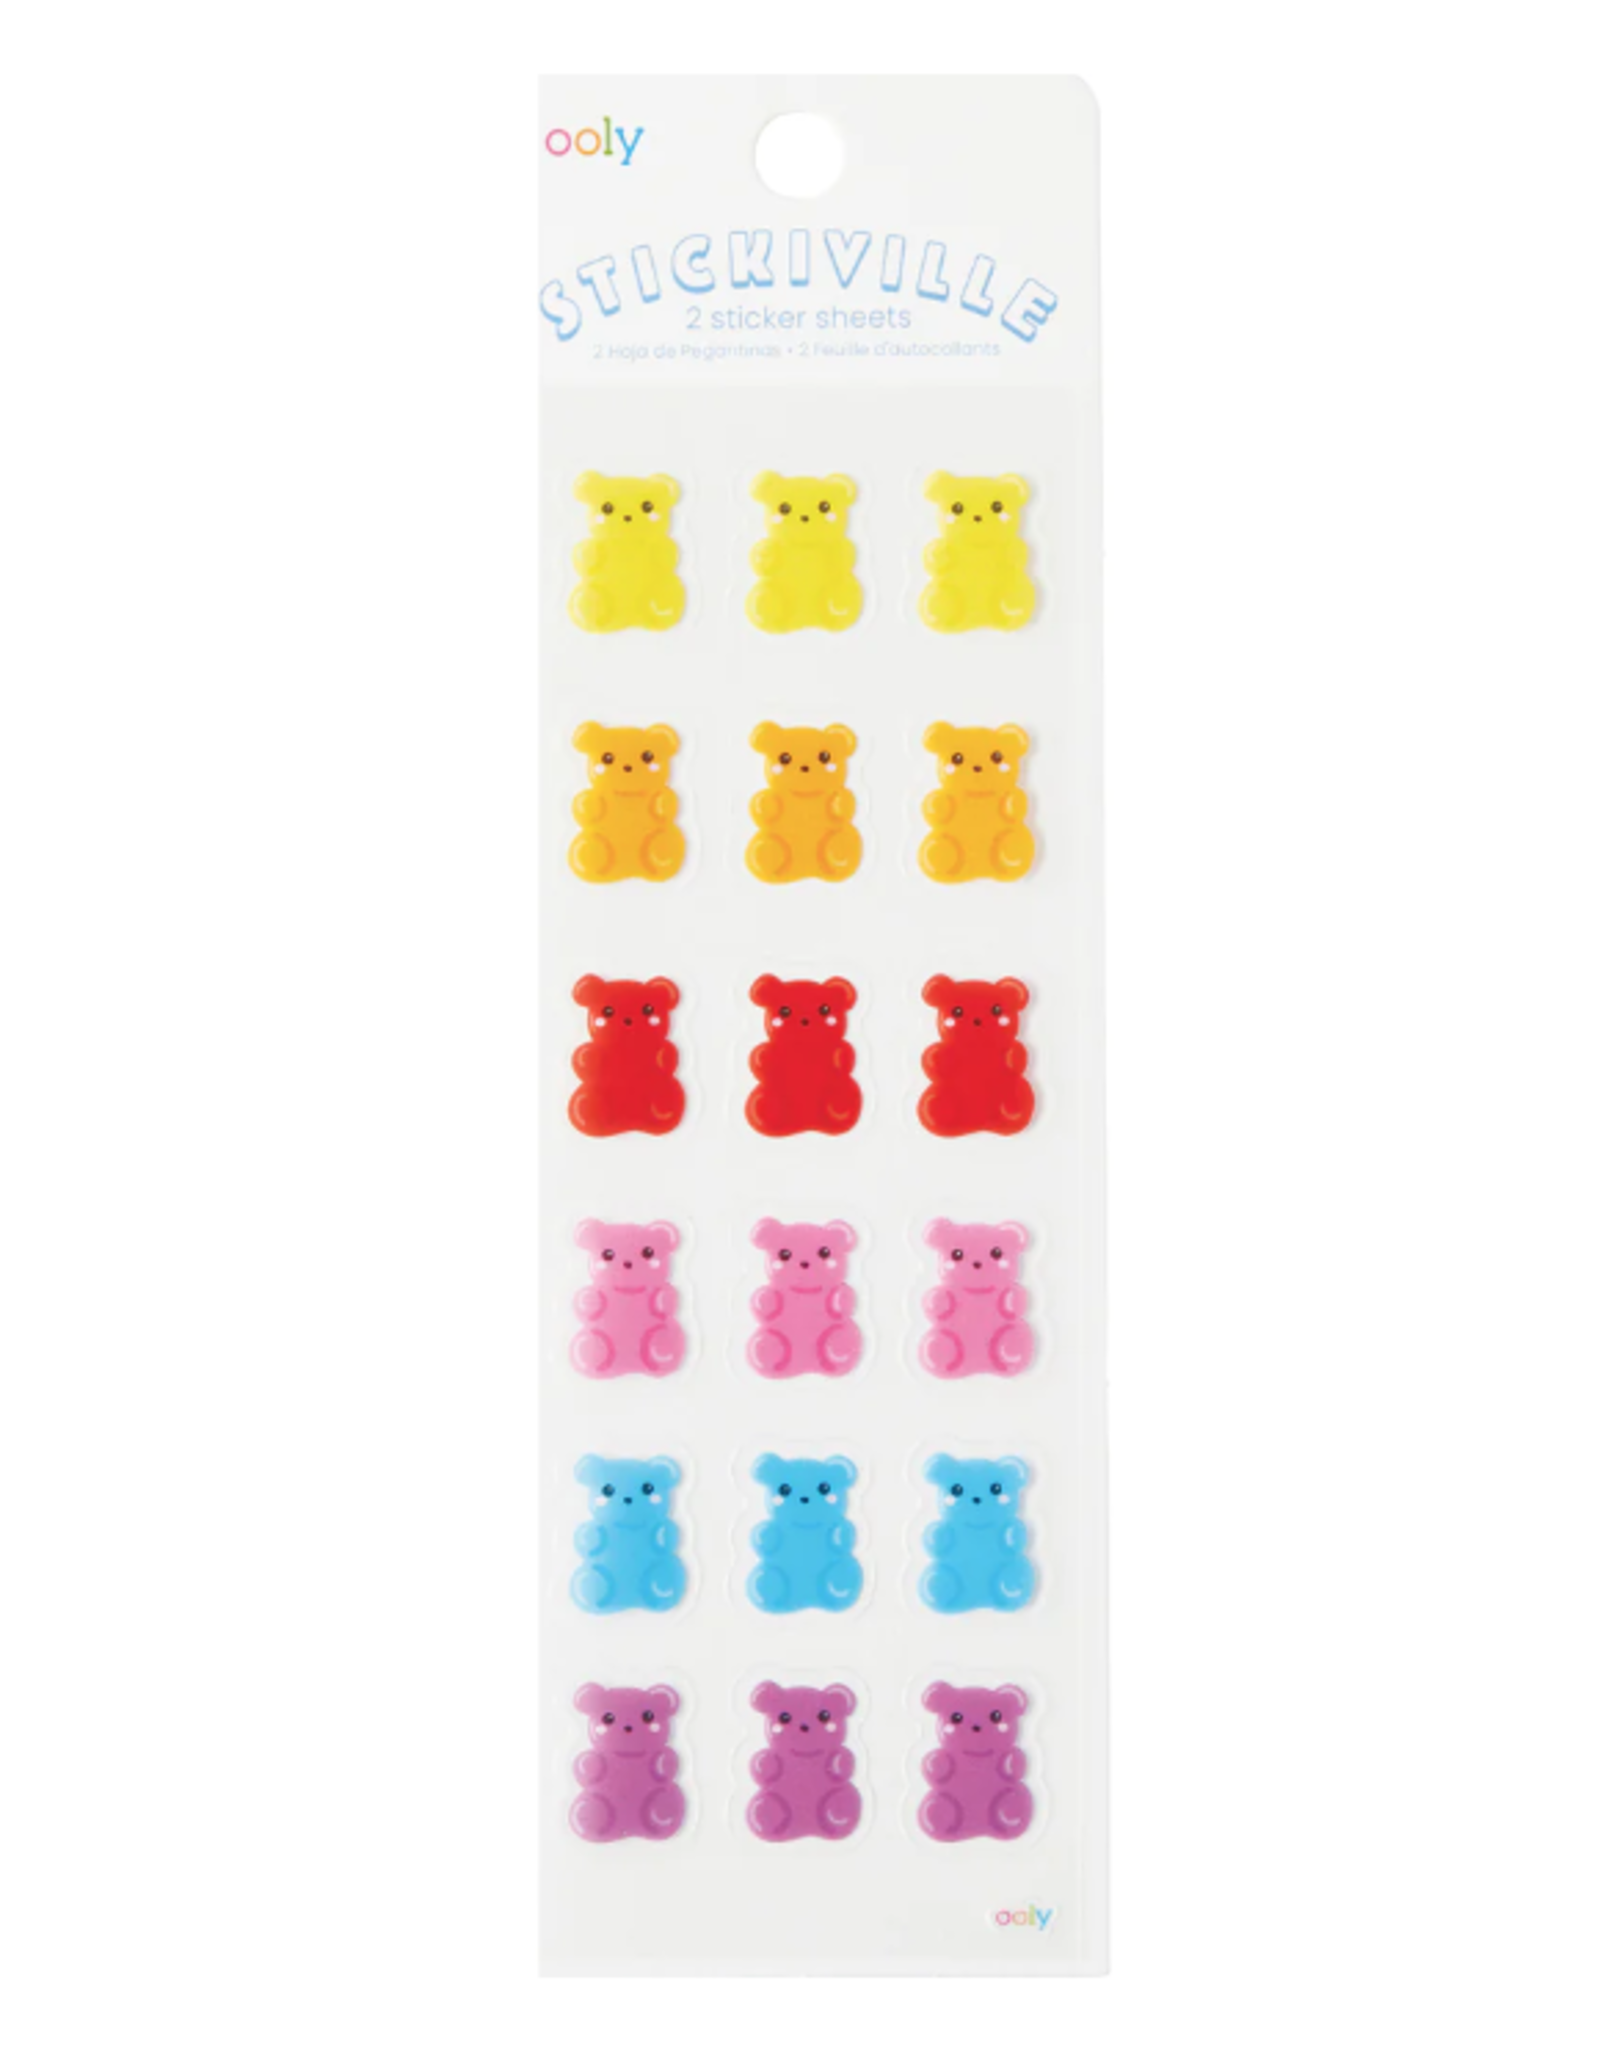 Ooly Stickiville Gummy Bears Stickers